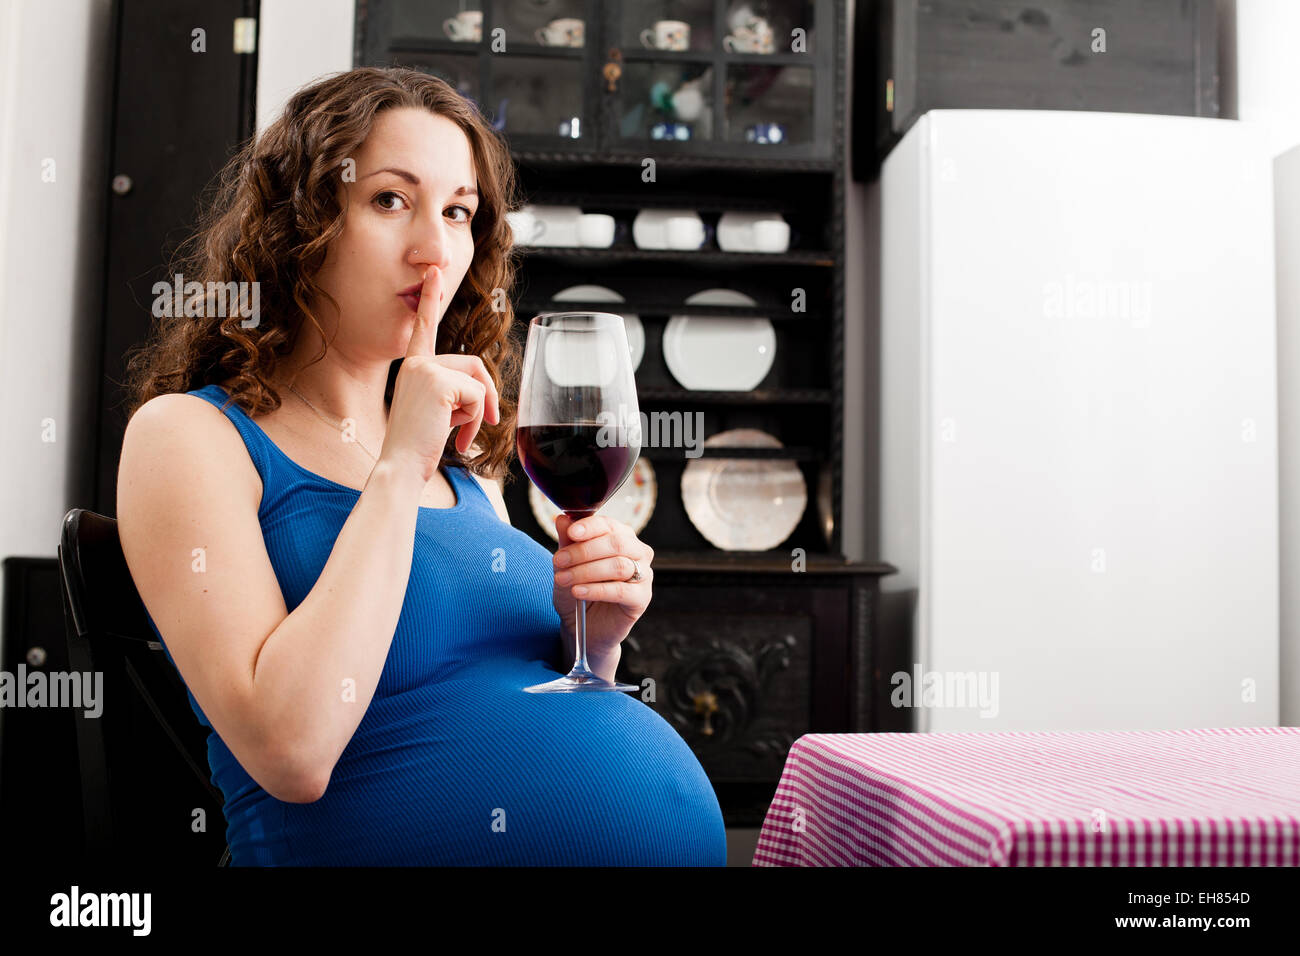 Woman in full term pregnancy drinking red wine. Stock Photo